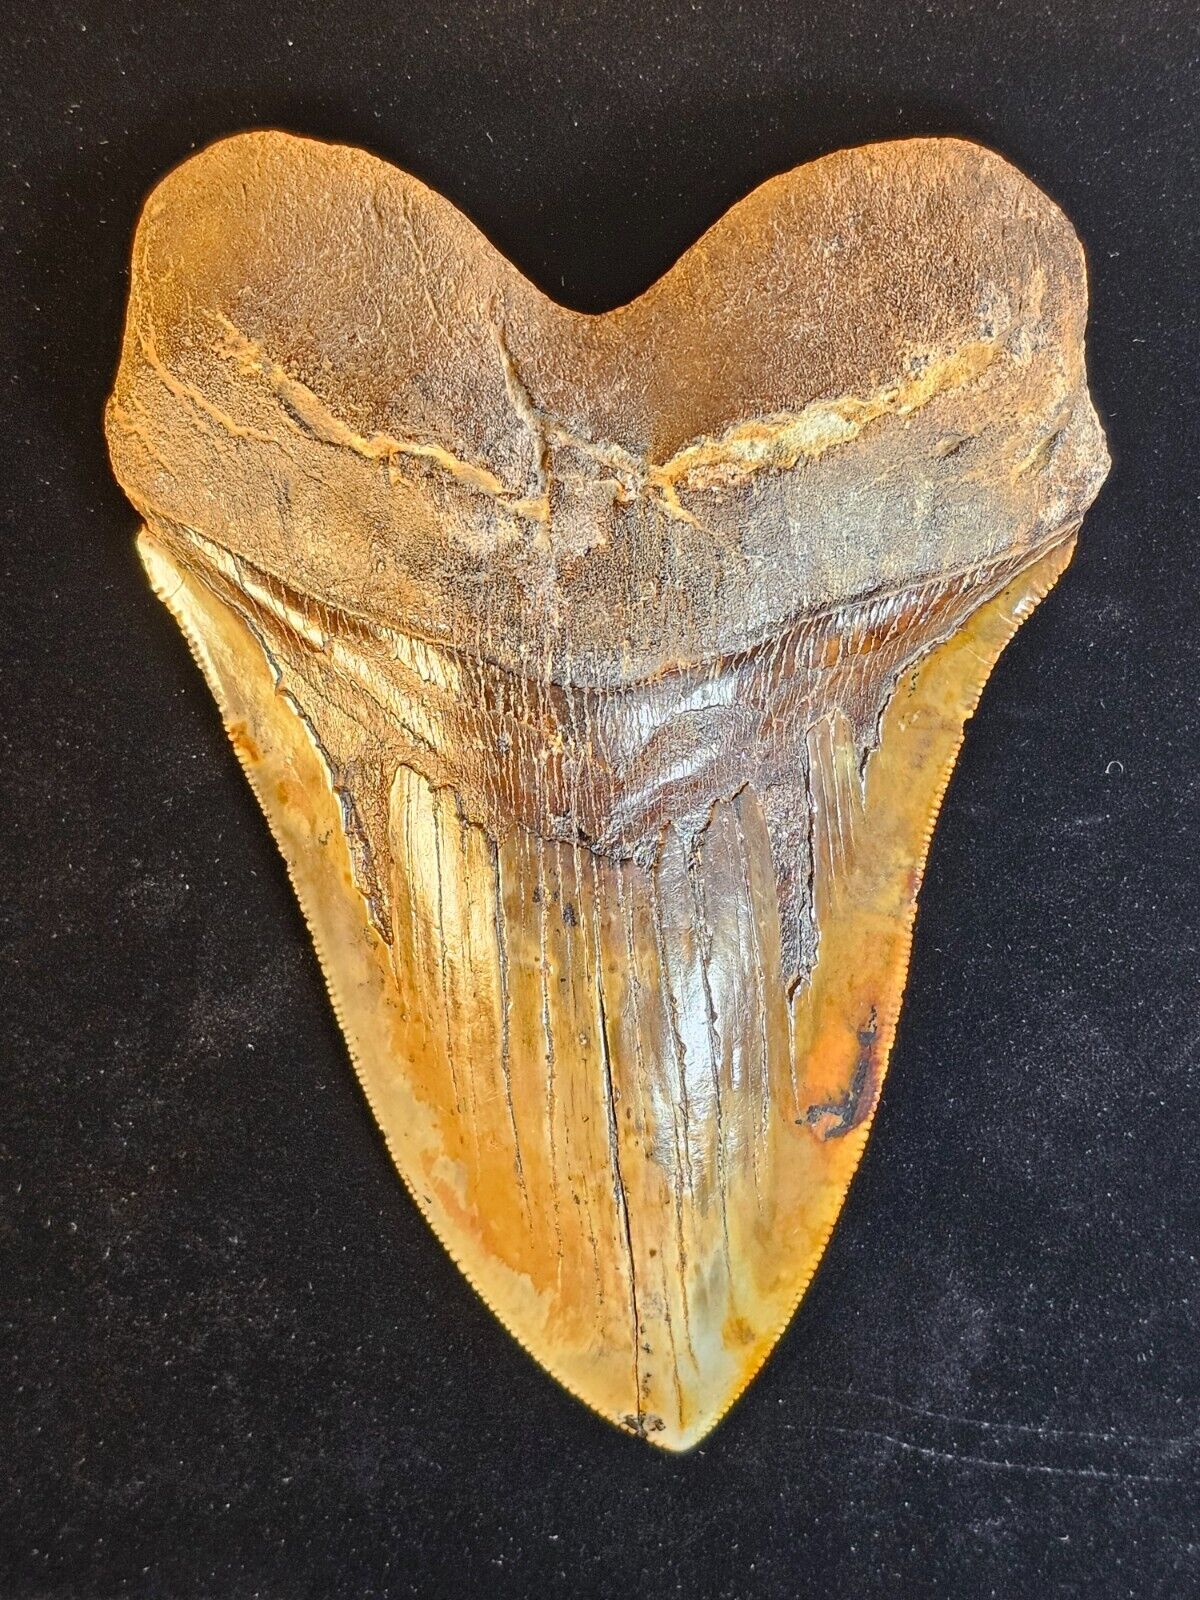 Extremely rare, Huge Bakersfield Sharktooth Hill fire zone Megalodon tooth.